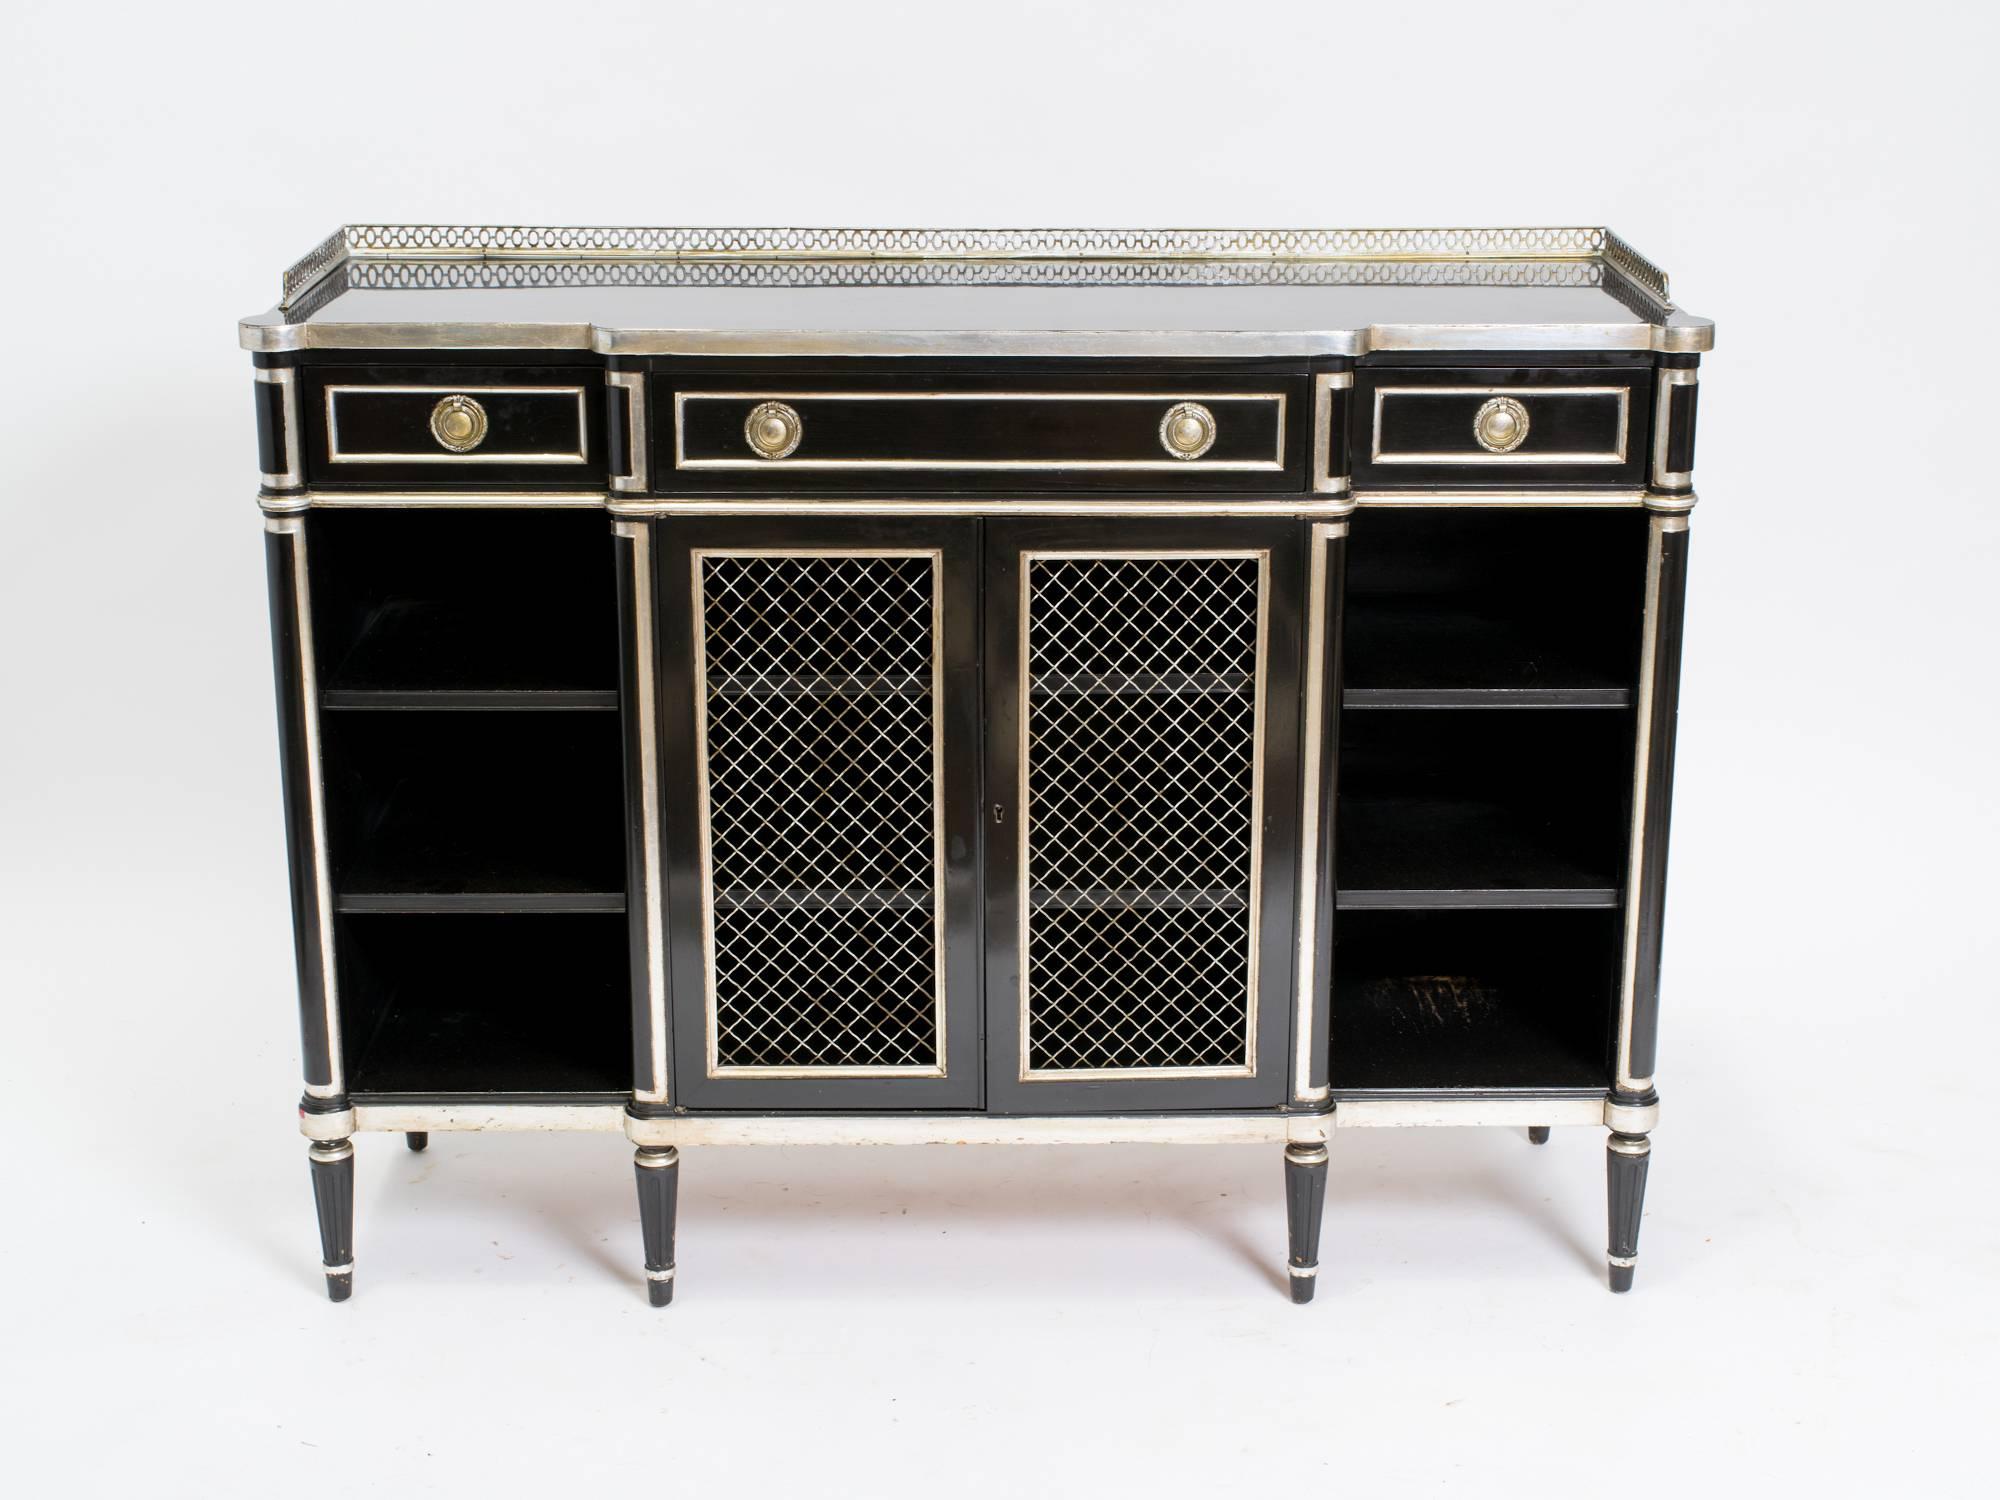 High quality black lacquer and silver leaf 1940s Regency style credenza.